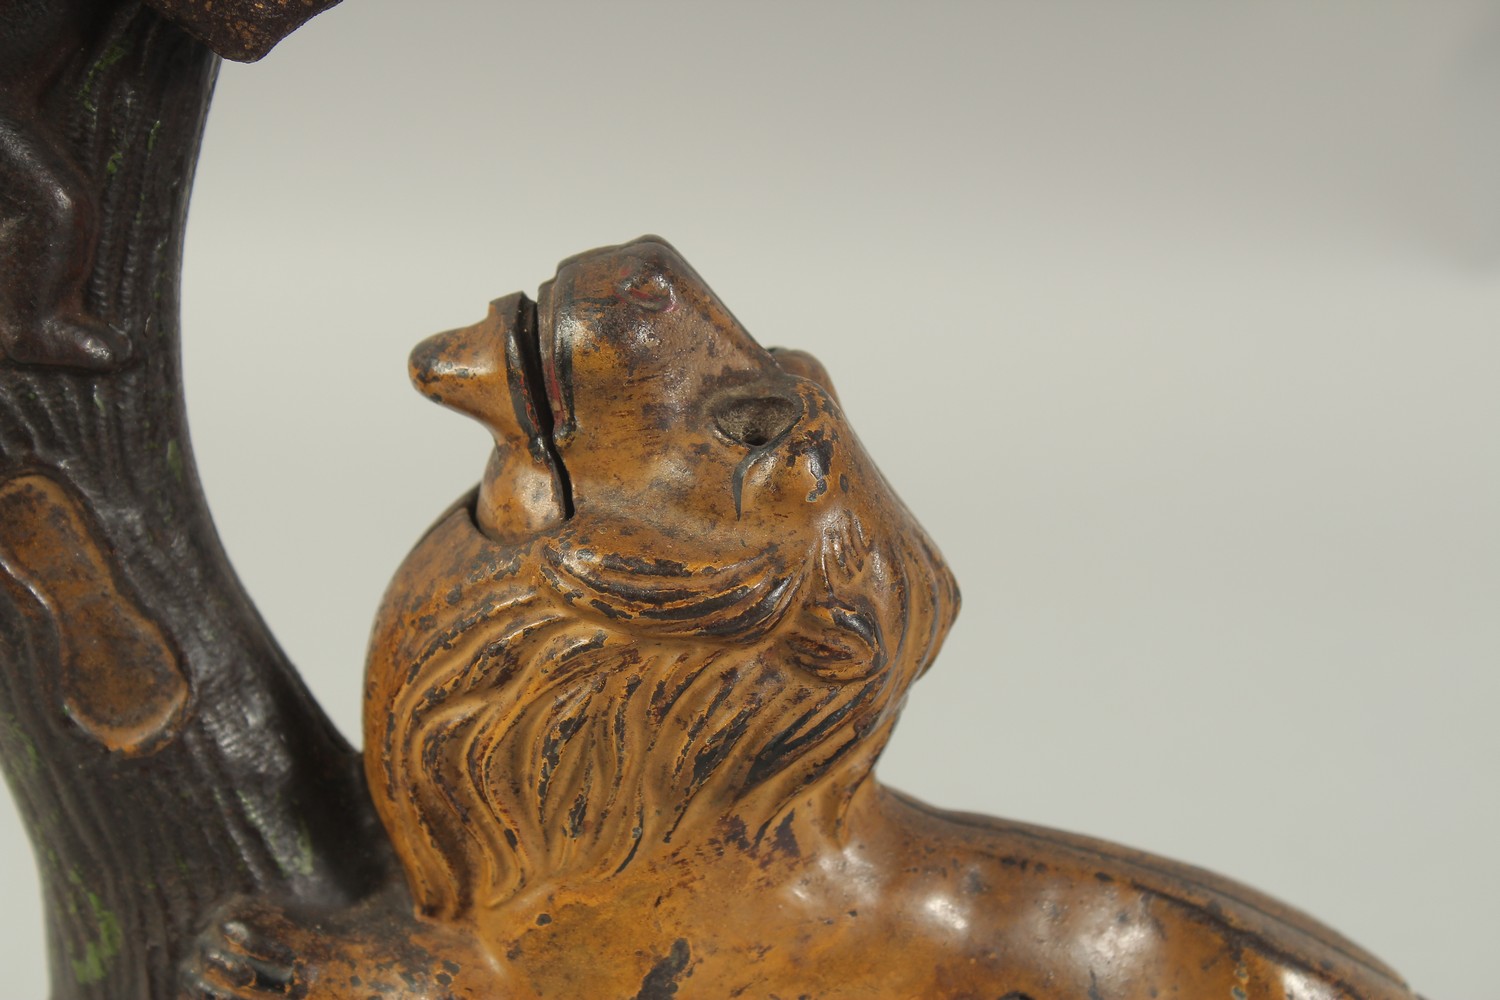 KYSER & REX CO. FRANKFORD, PENNSYLVANIA, CIRCA. 1880. A LION AND TWO MONKEYS, CAST IRON, PAINTED - Image 3 of 15